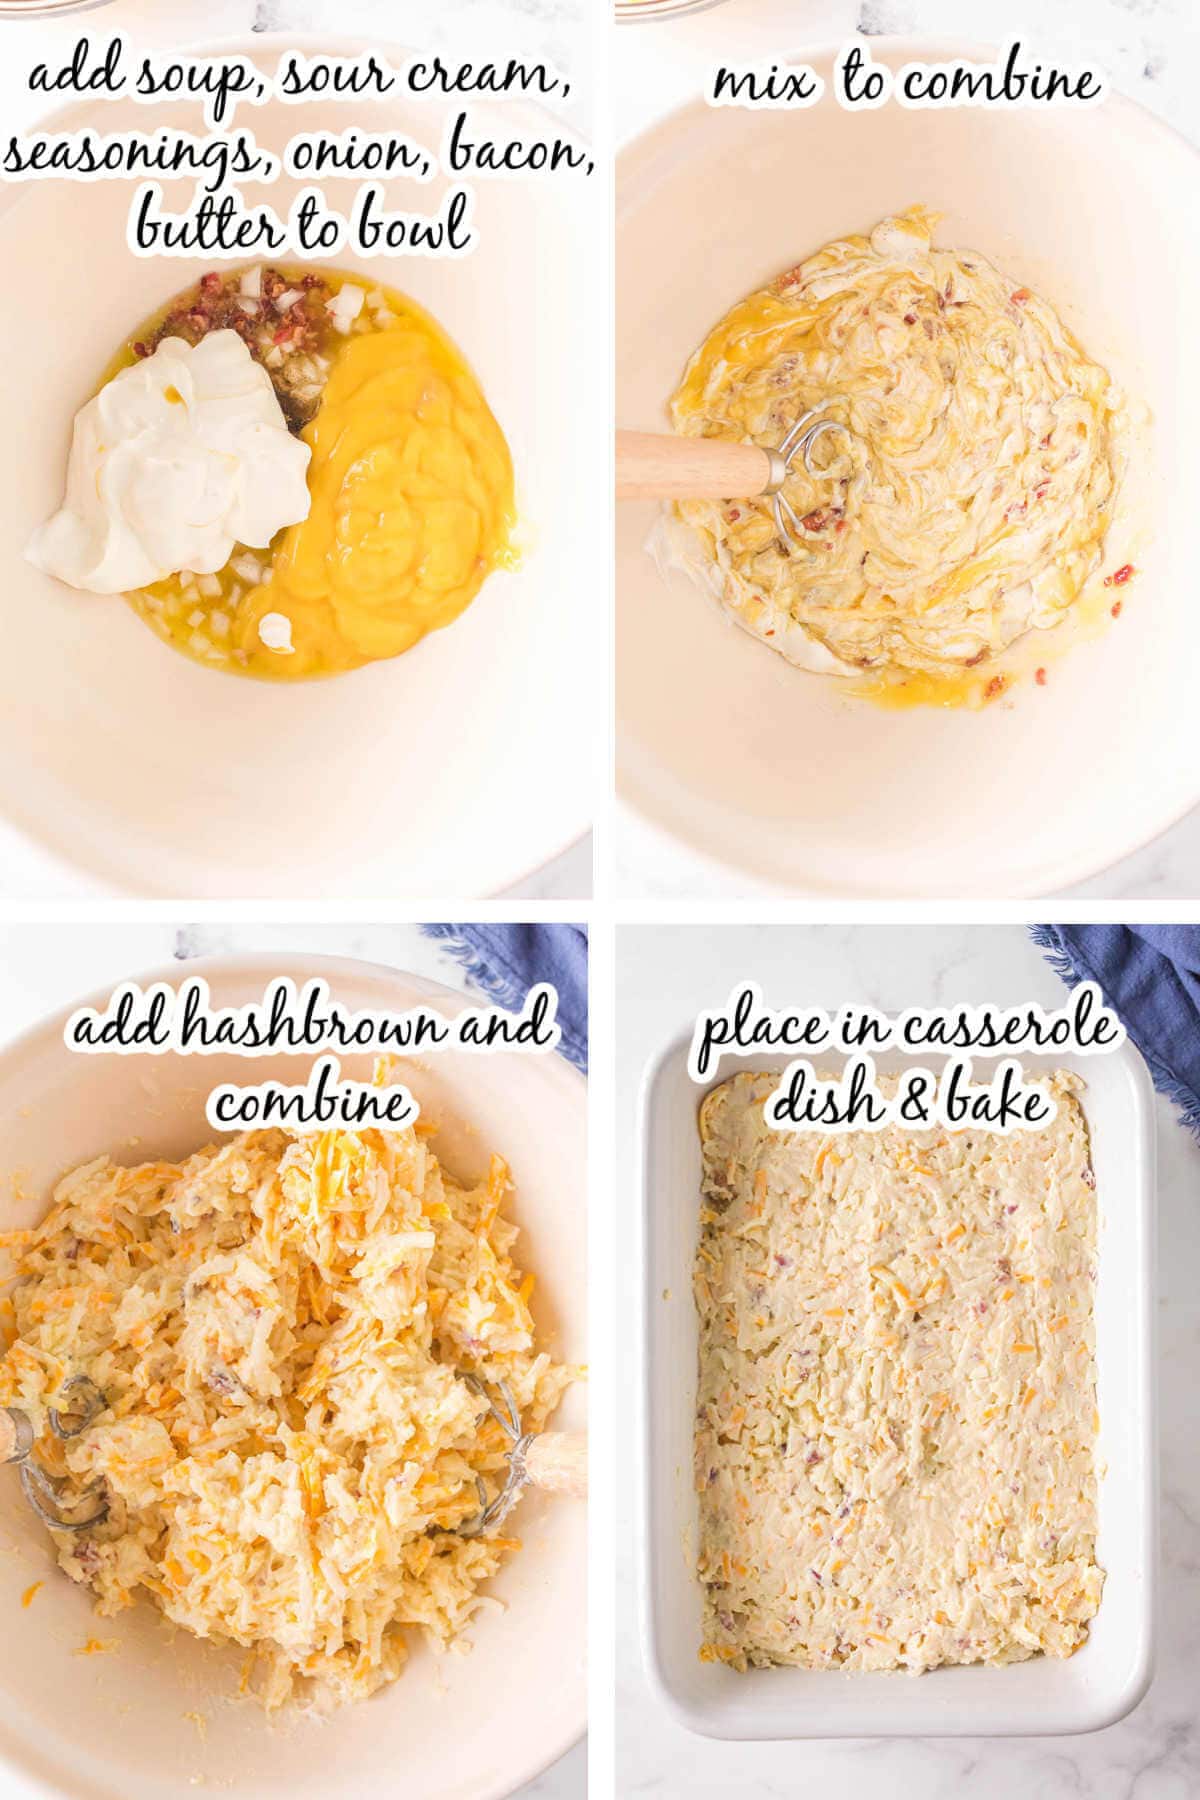 Photos with step by step instruction to make potato casserole, with print overlay.